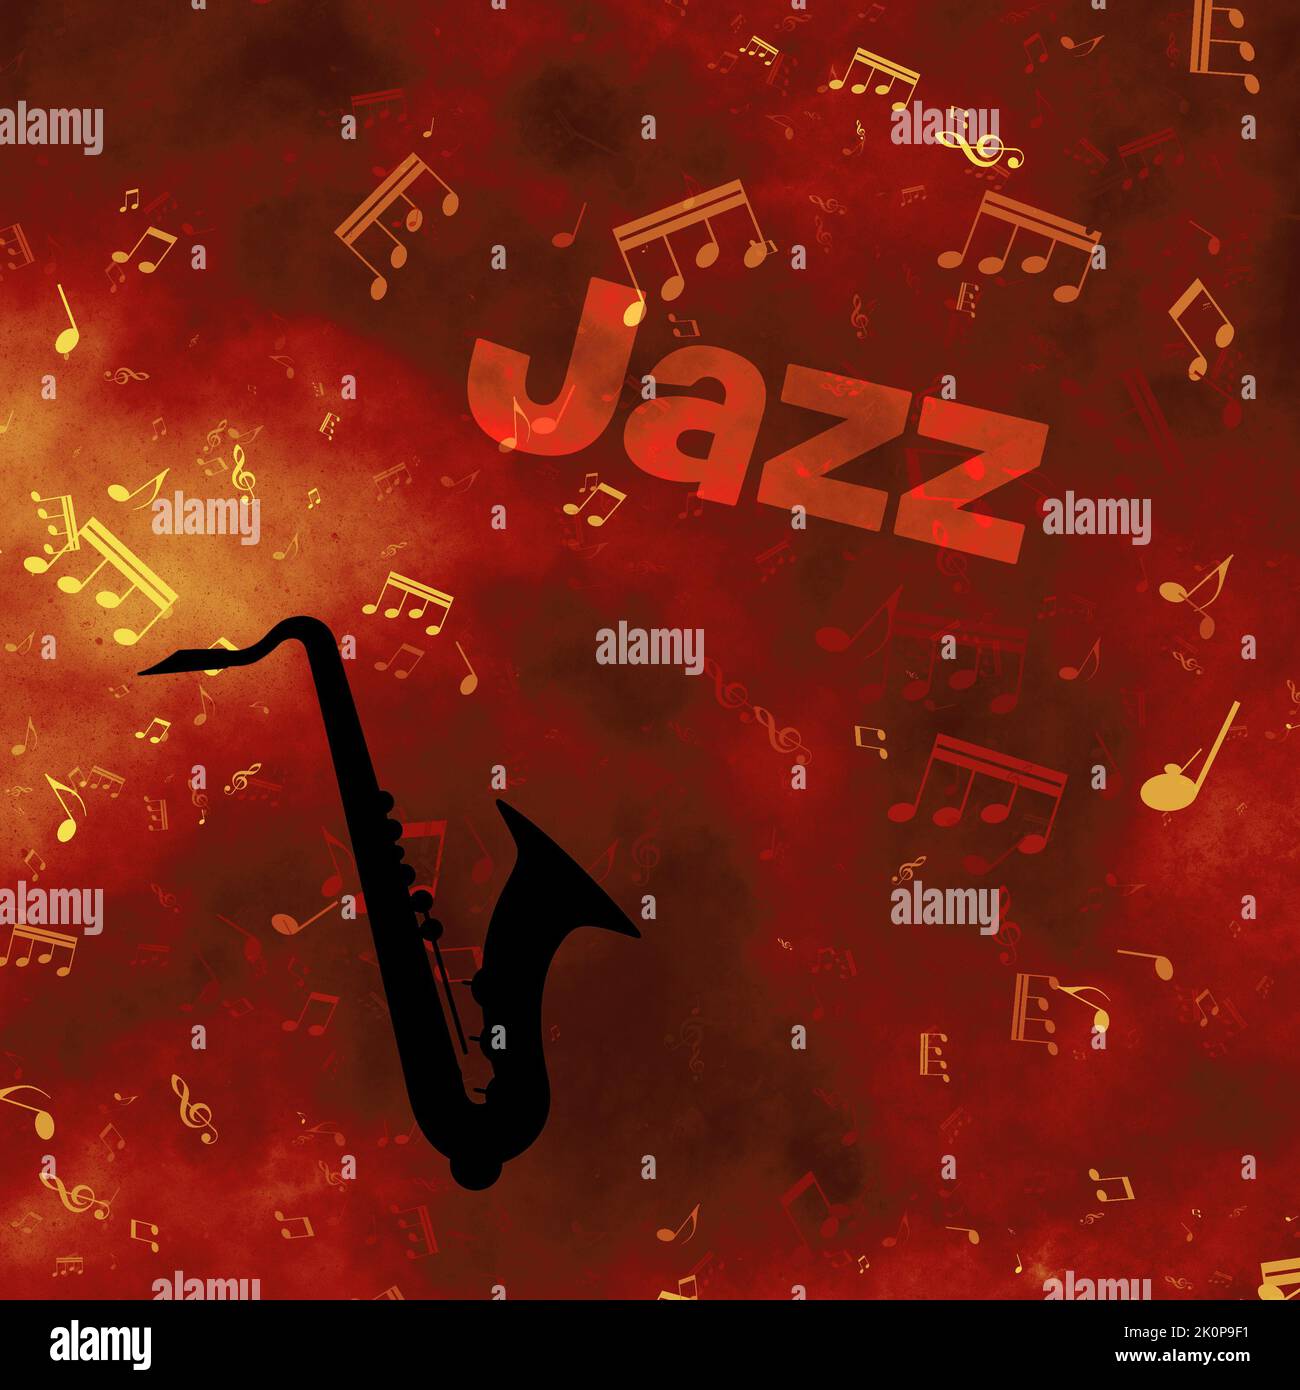 saxophone instrument and background of music notes for Jazz music concept Stock Photo